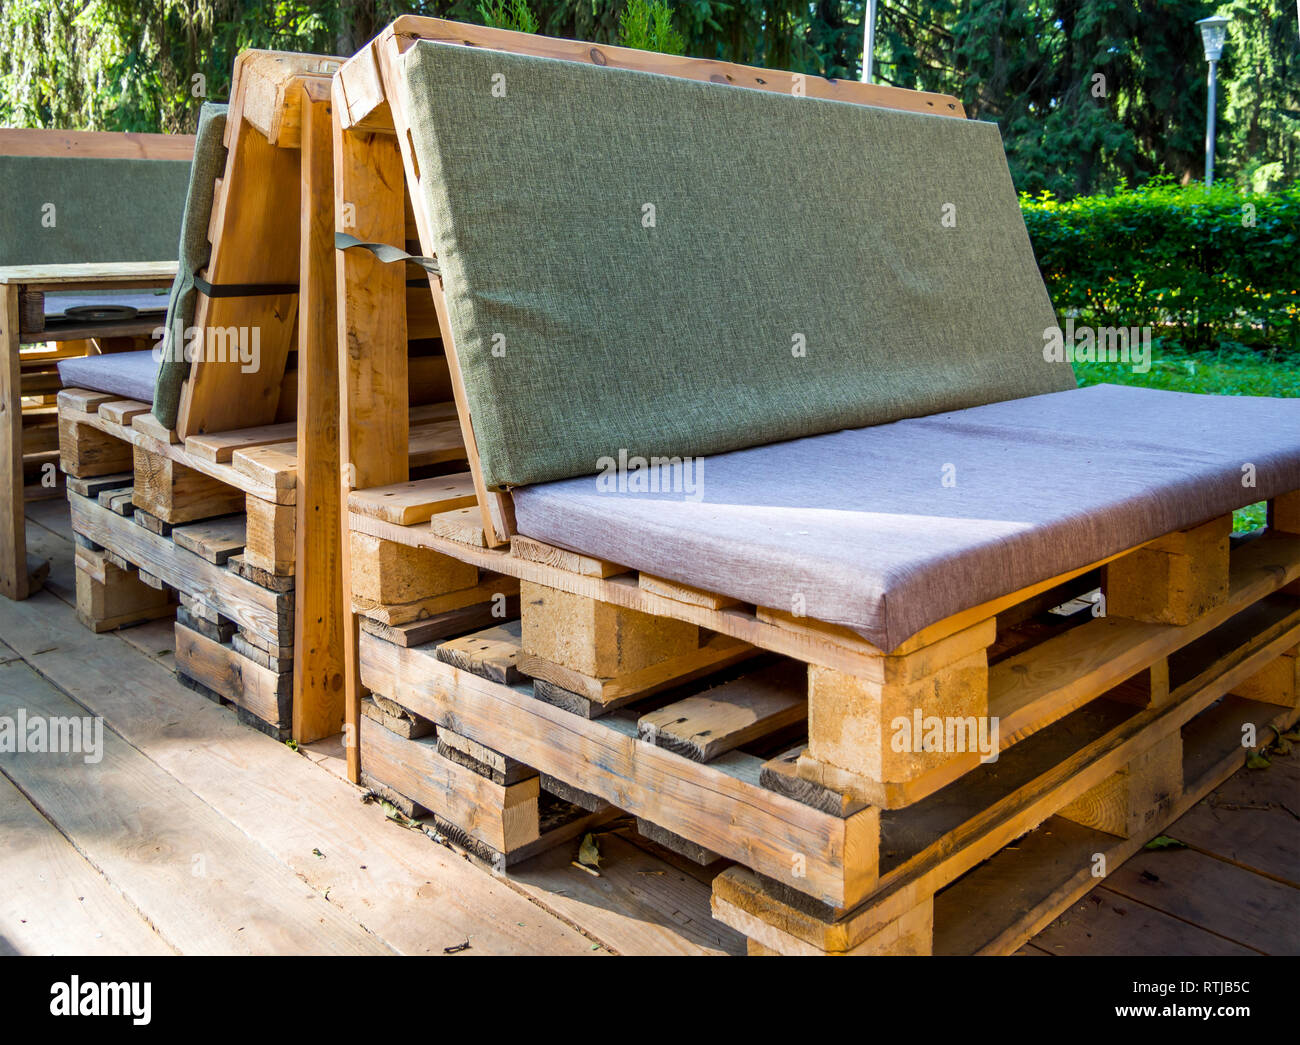 Furniture Made From Old Wooden Cargo Pallets Stock Photo